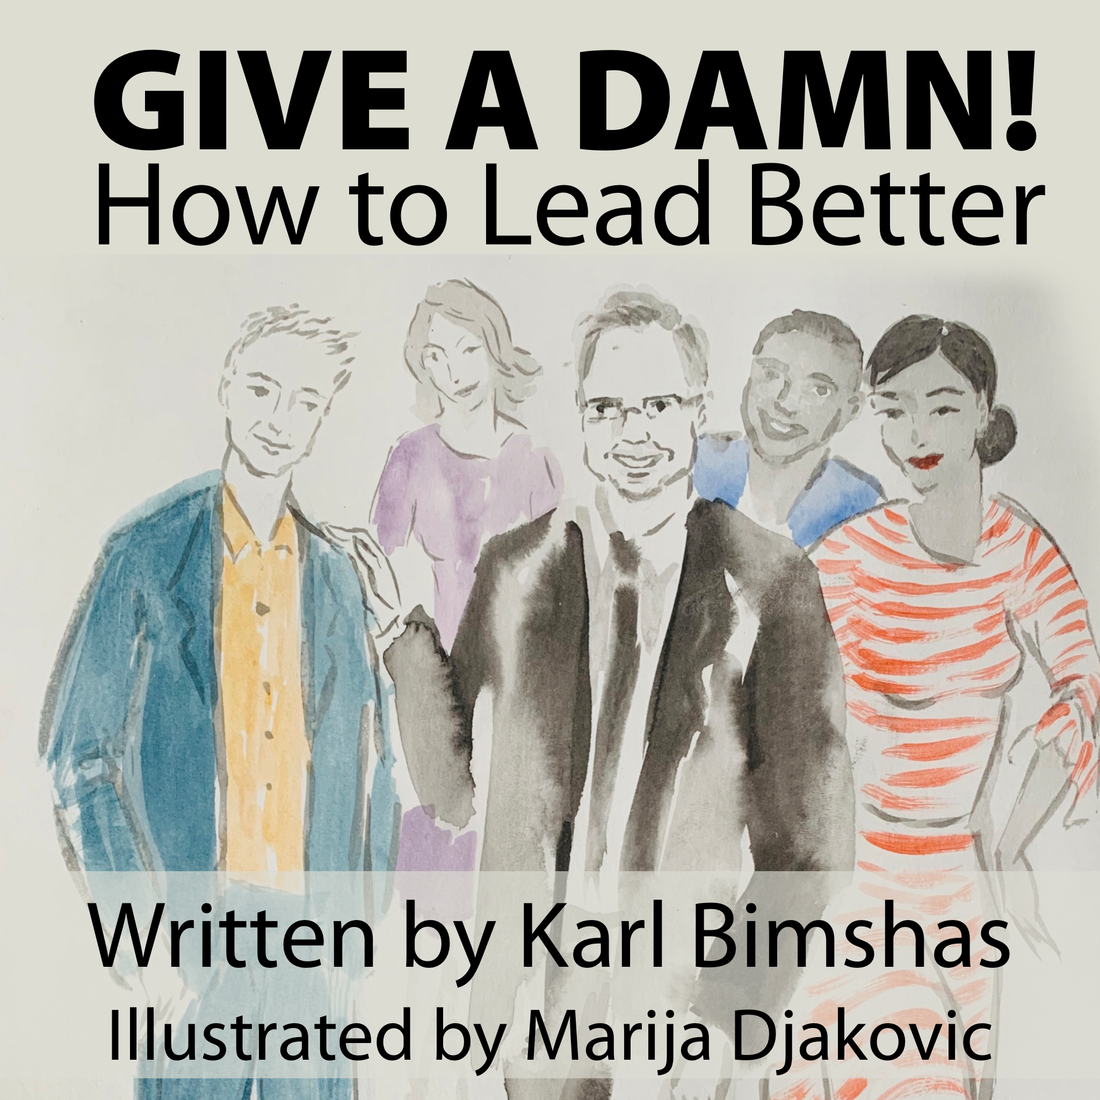 How to Lead Better